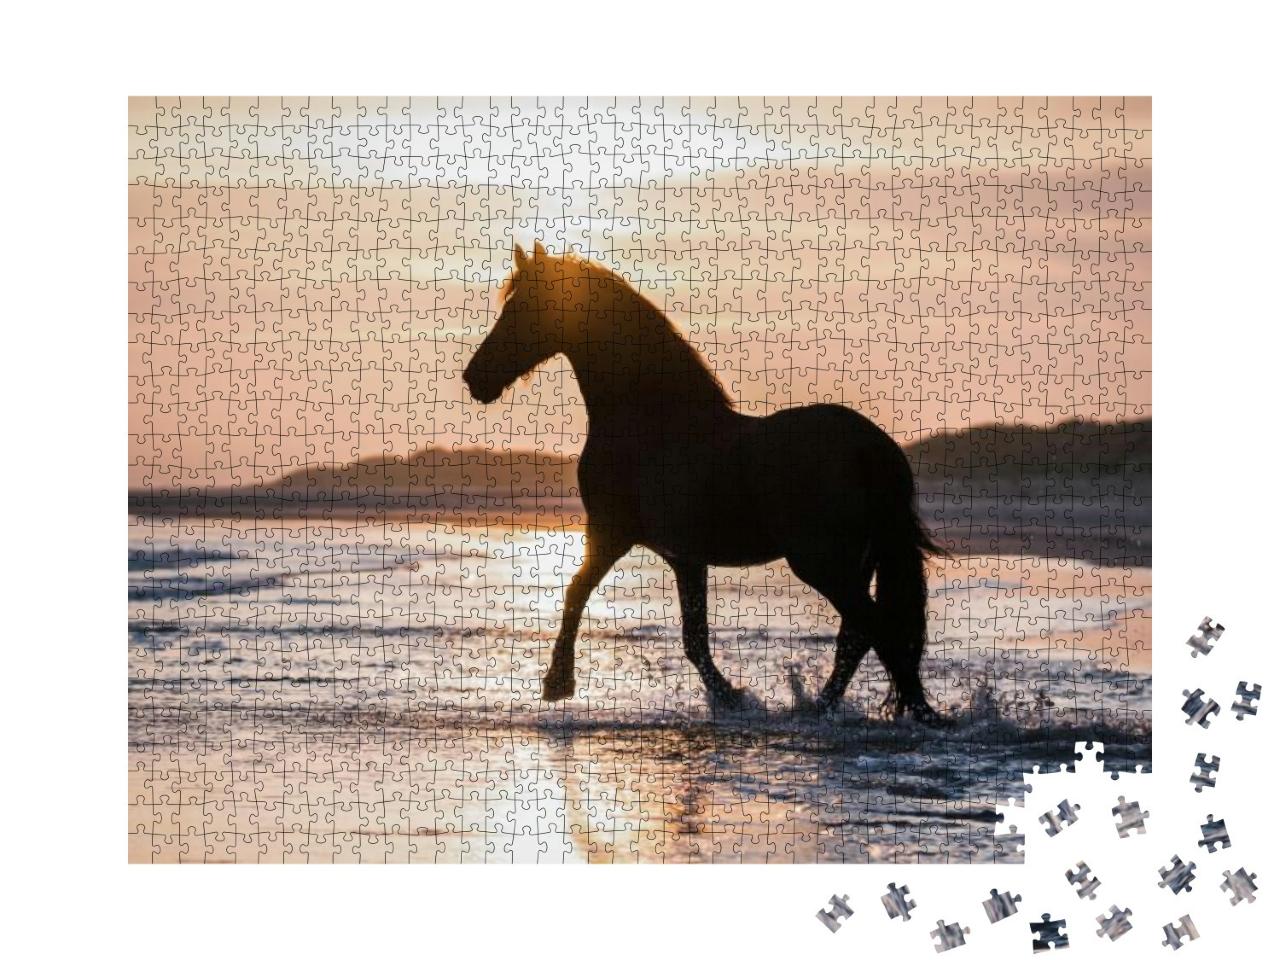 Black Horse Trotting Free At the Beach... Jigsaw Puzzle with 1000 pieces